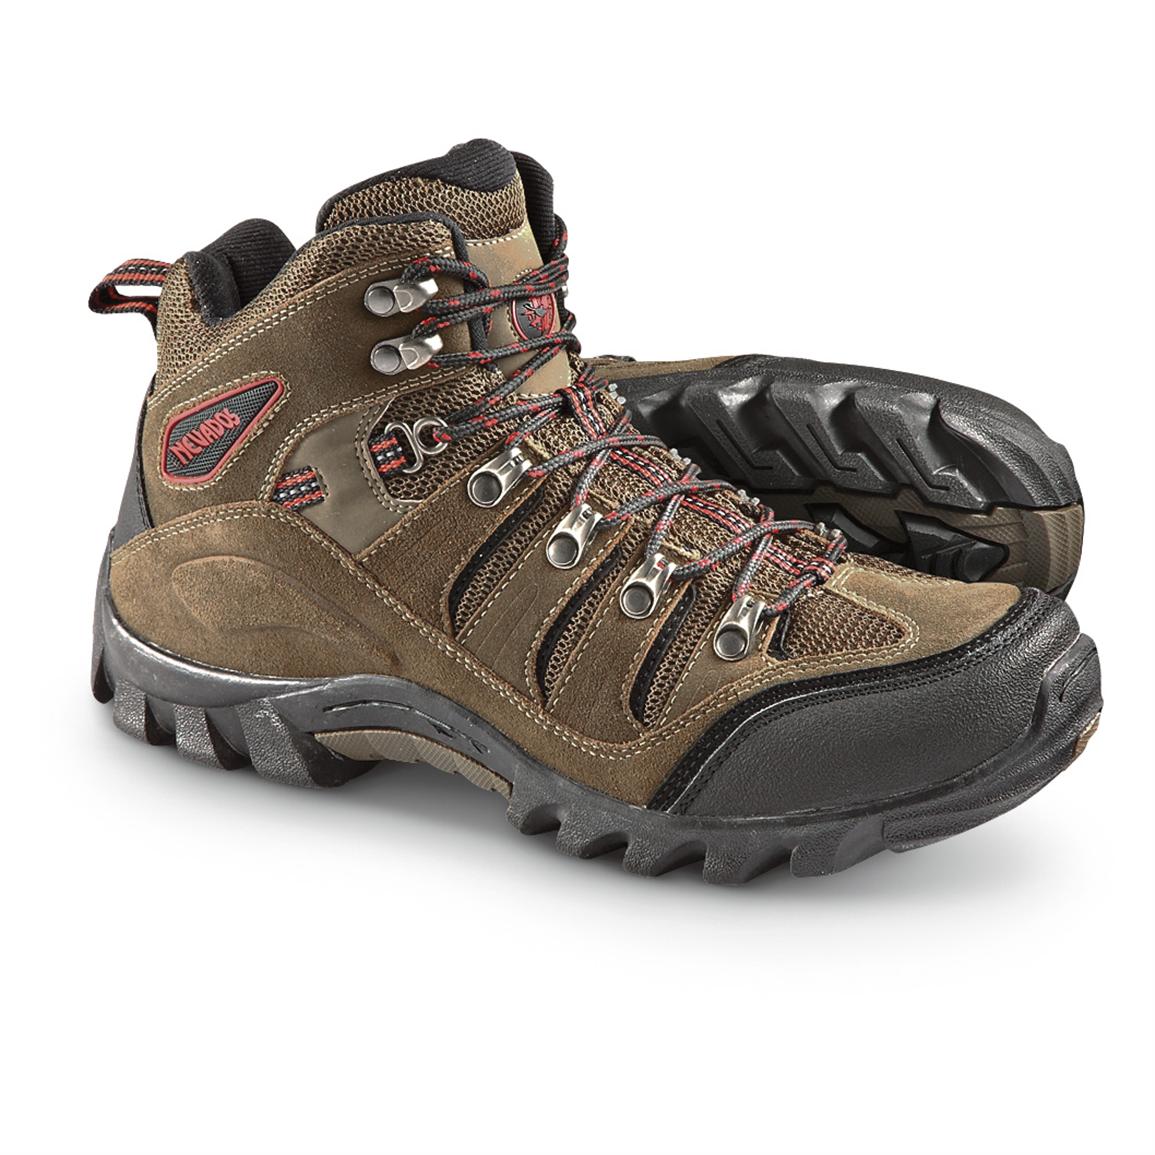 Men's Nevados® Basque Mid Hiking Boots, Brown - 297345, Hiking Boots